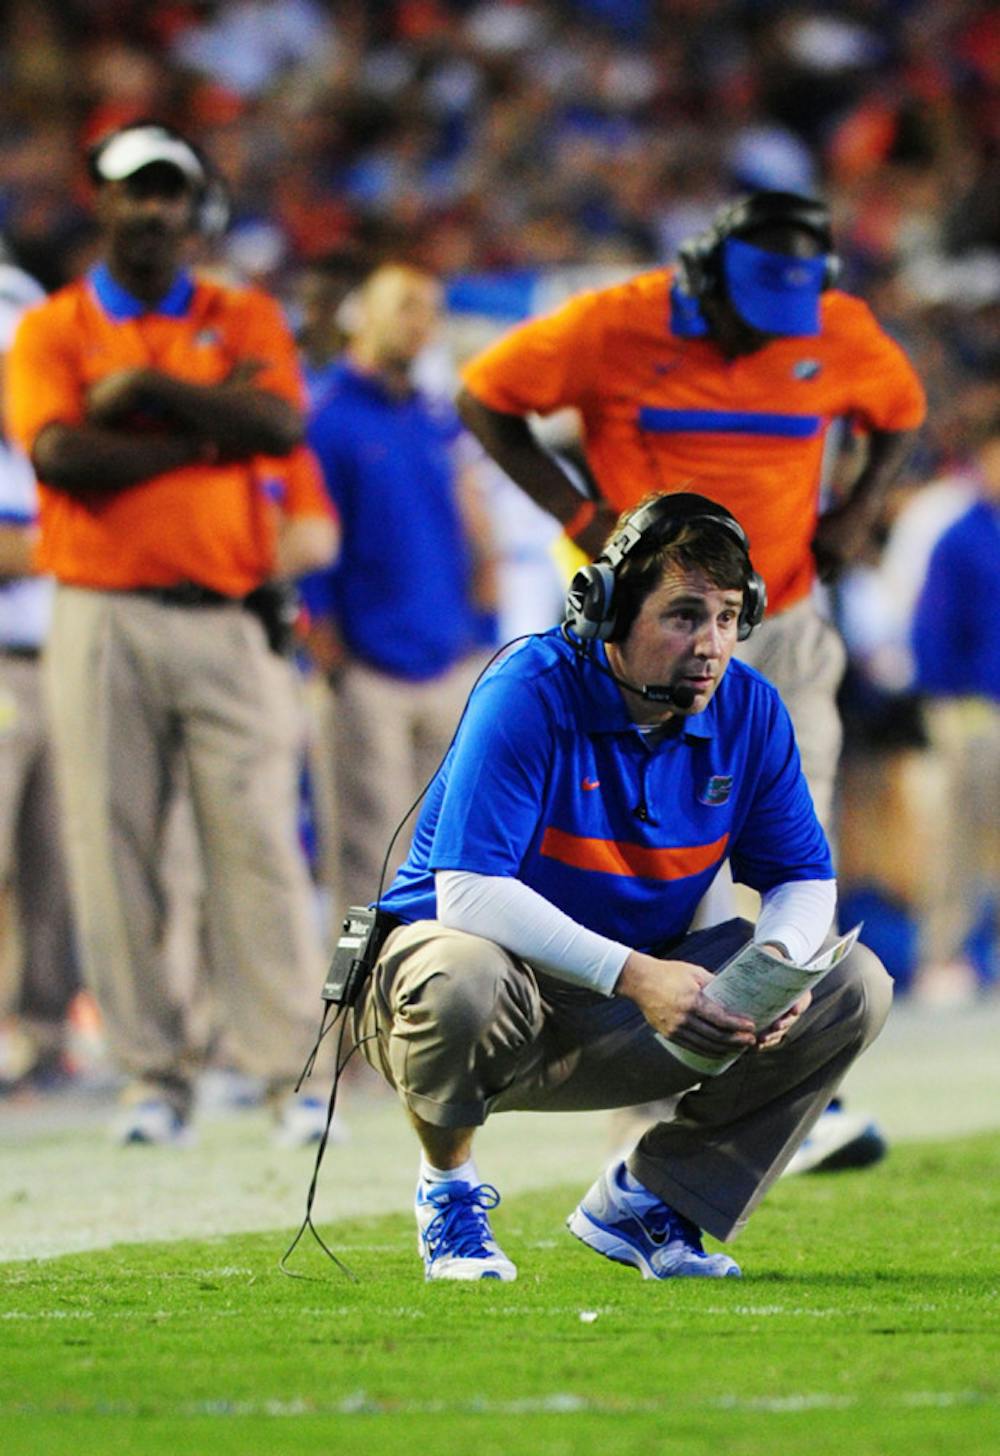 <p>Florida coach Will Muschamp said his team is “soft” after losing
21-7 to rival Florida State on Saturday. The loss drops the Gators
to 6-6.</p>